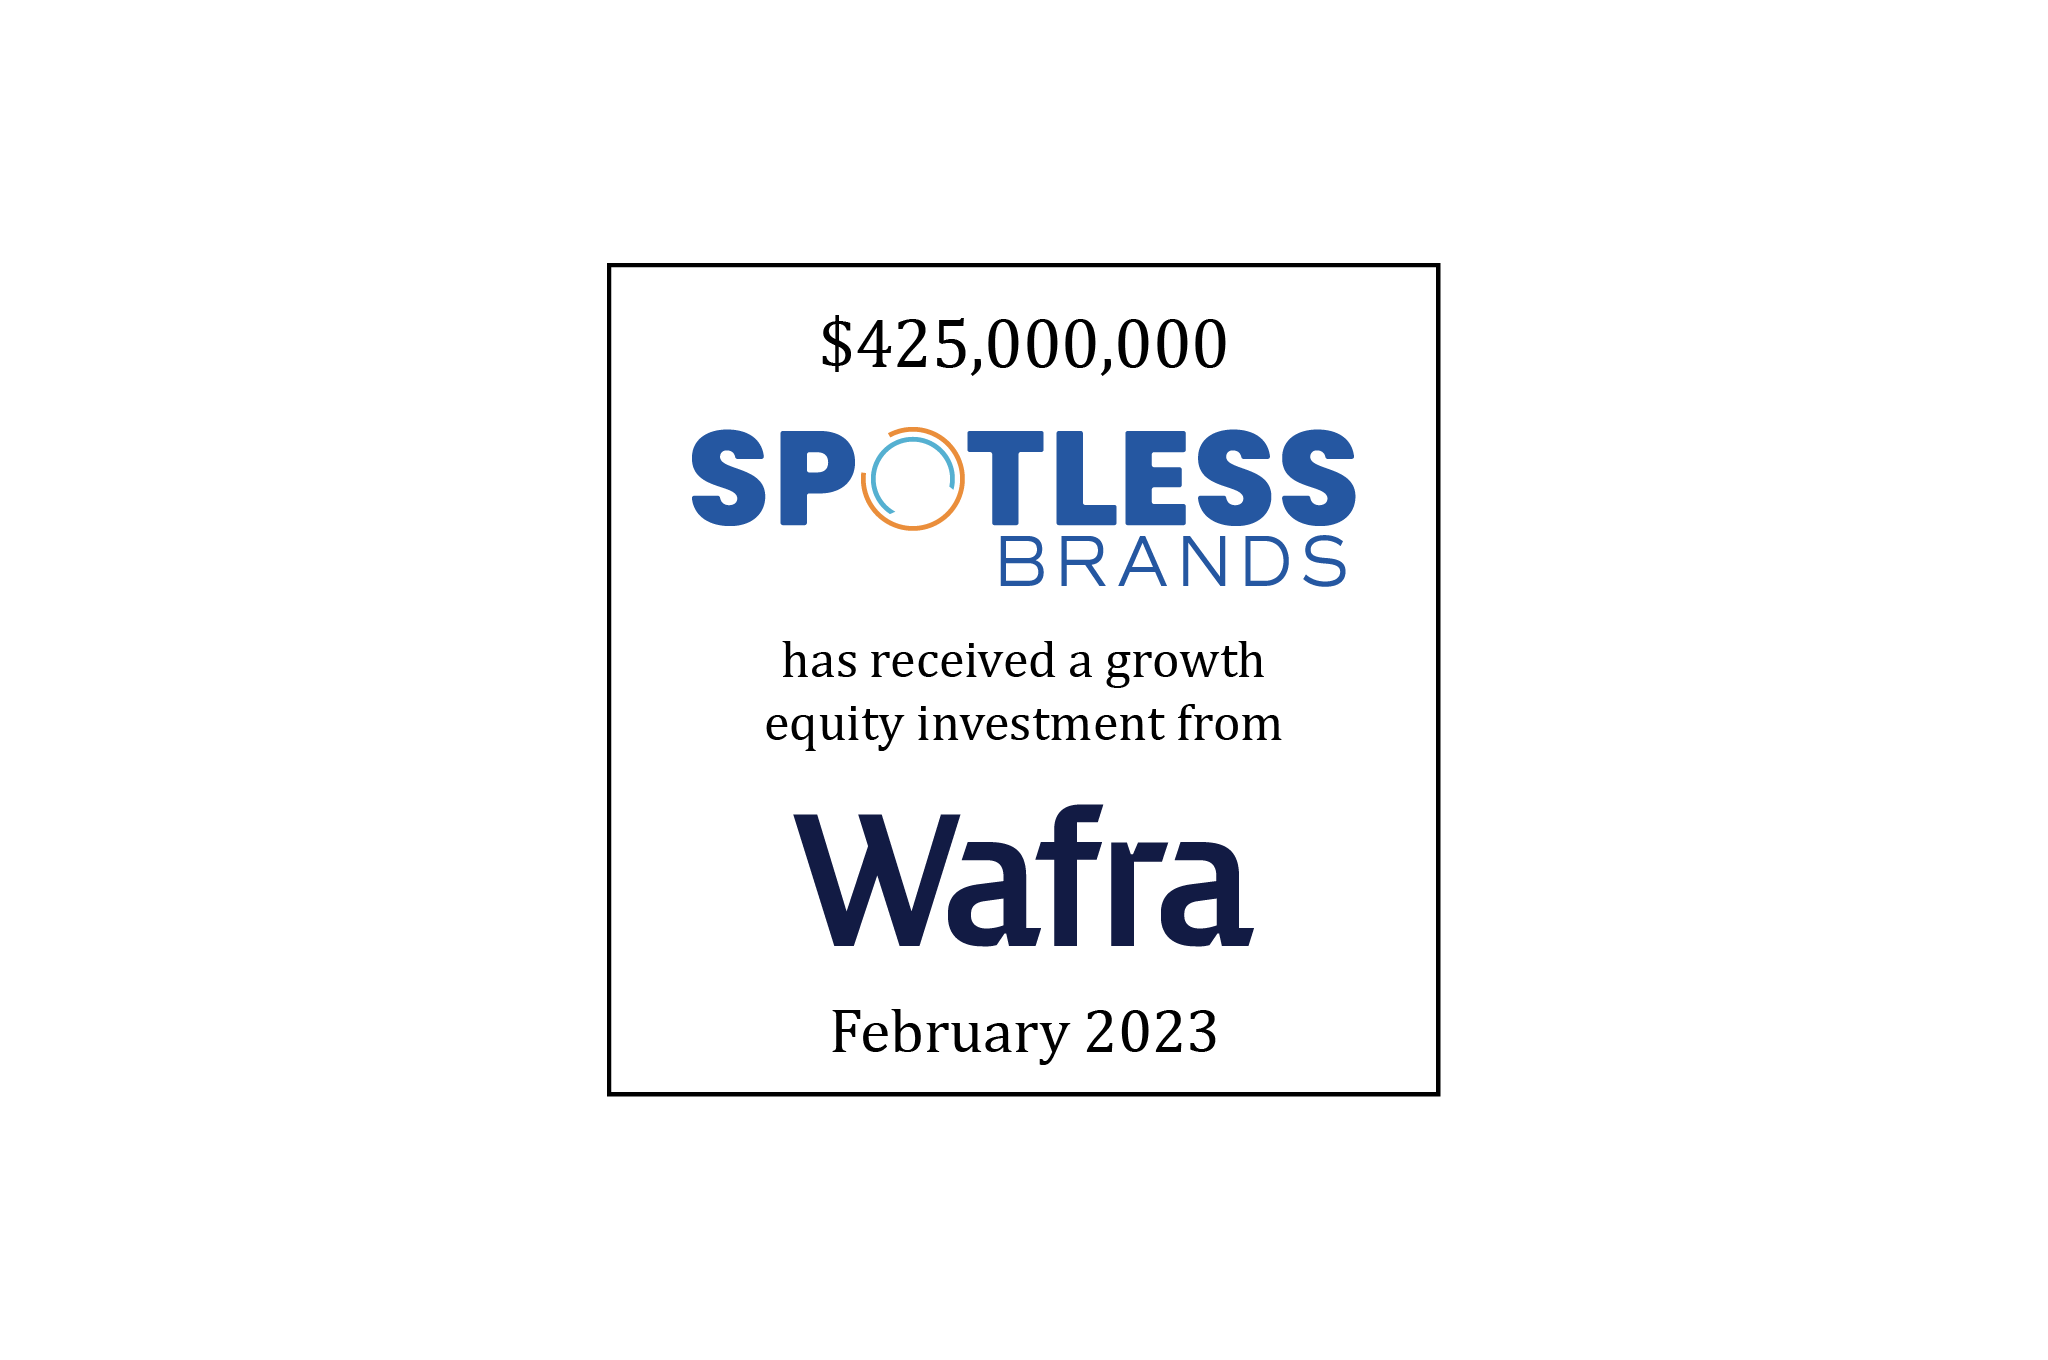 $425,000,000 | Spotless Brands (logo) has Received a Growth Equity Investment from Wafra (logo) | February 2023